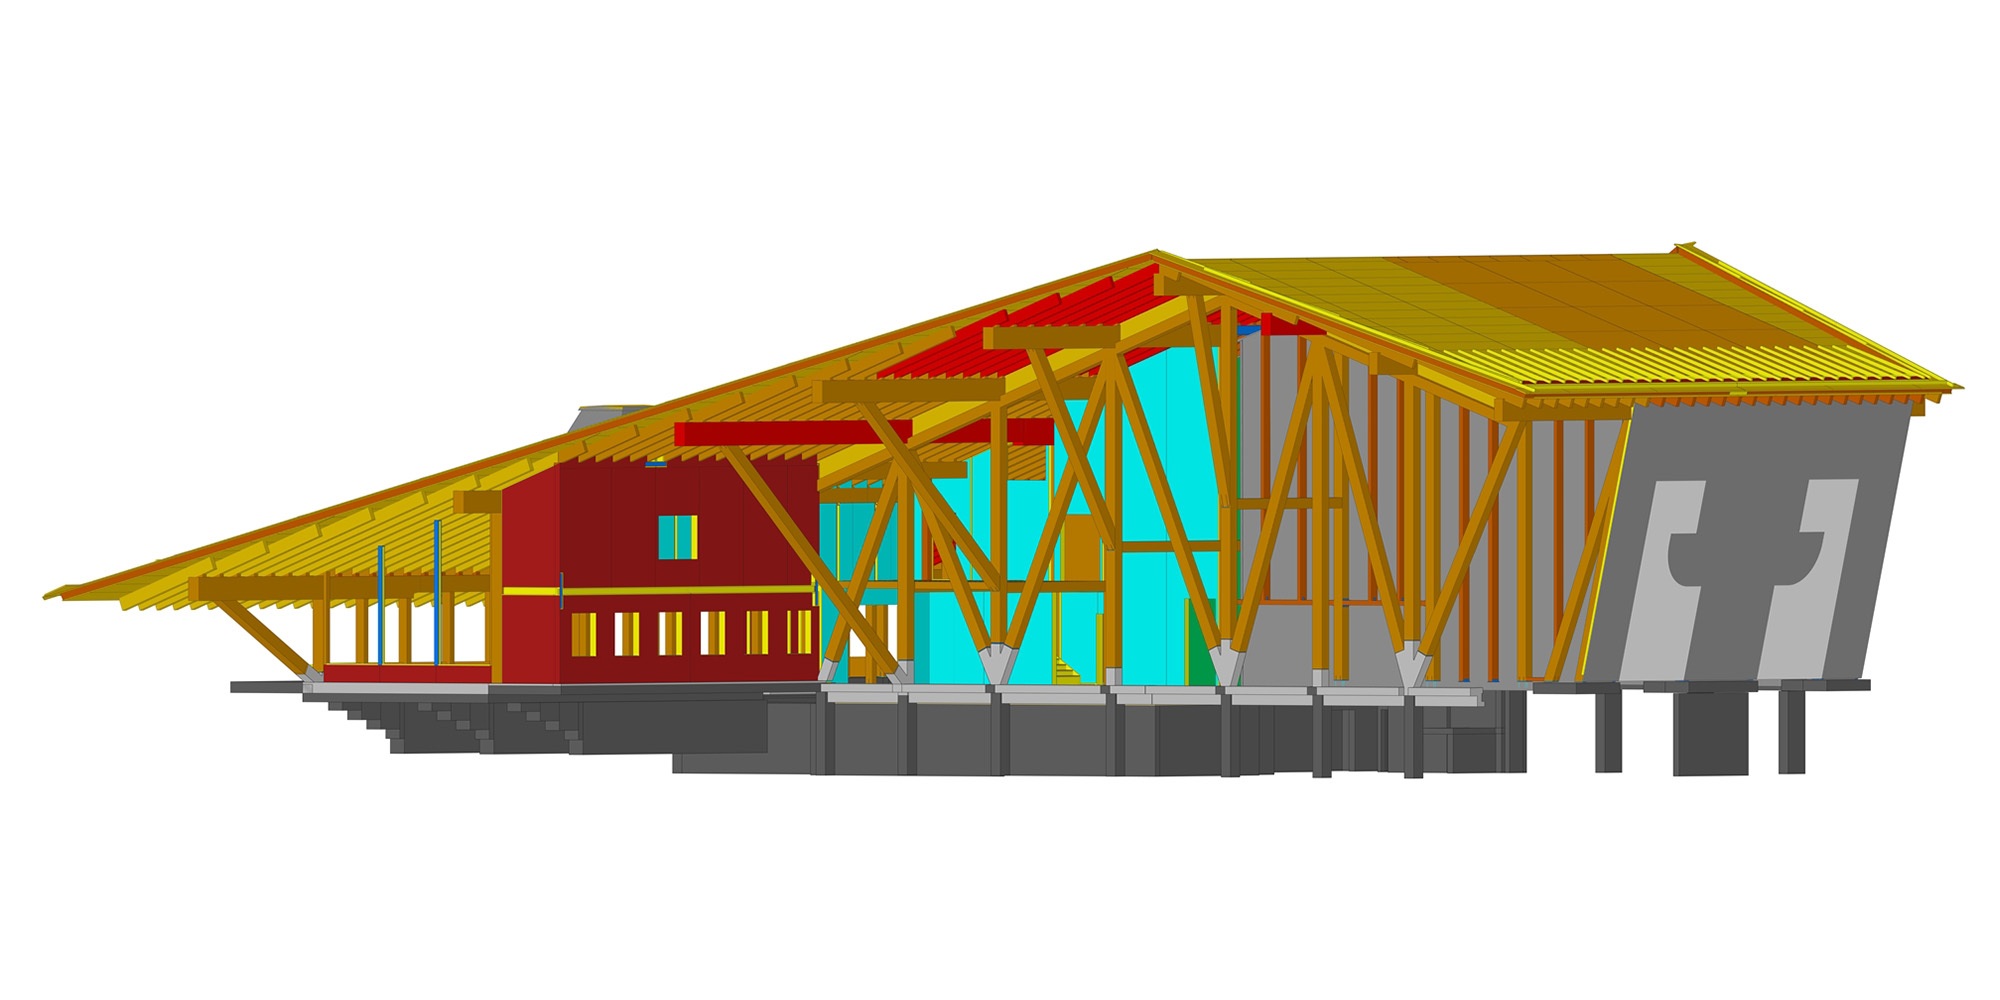 The Chäserrugg timber construction as a 3D model with different coloured areas